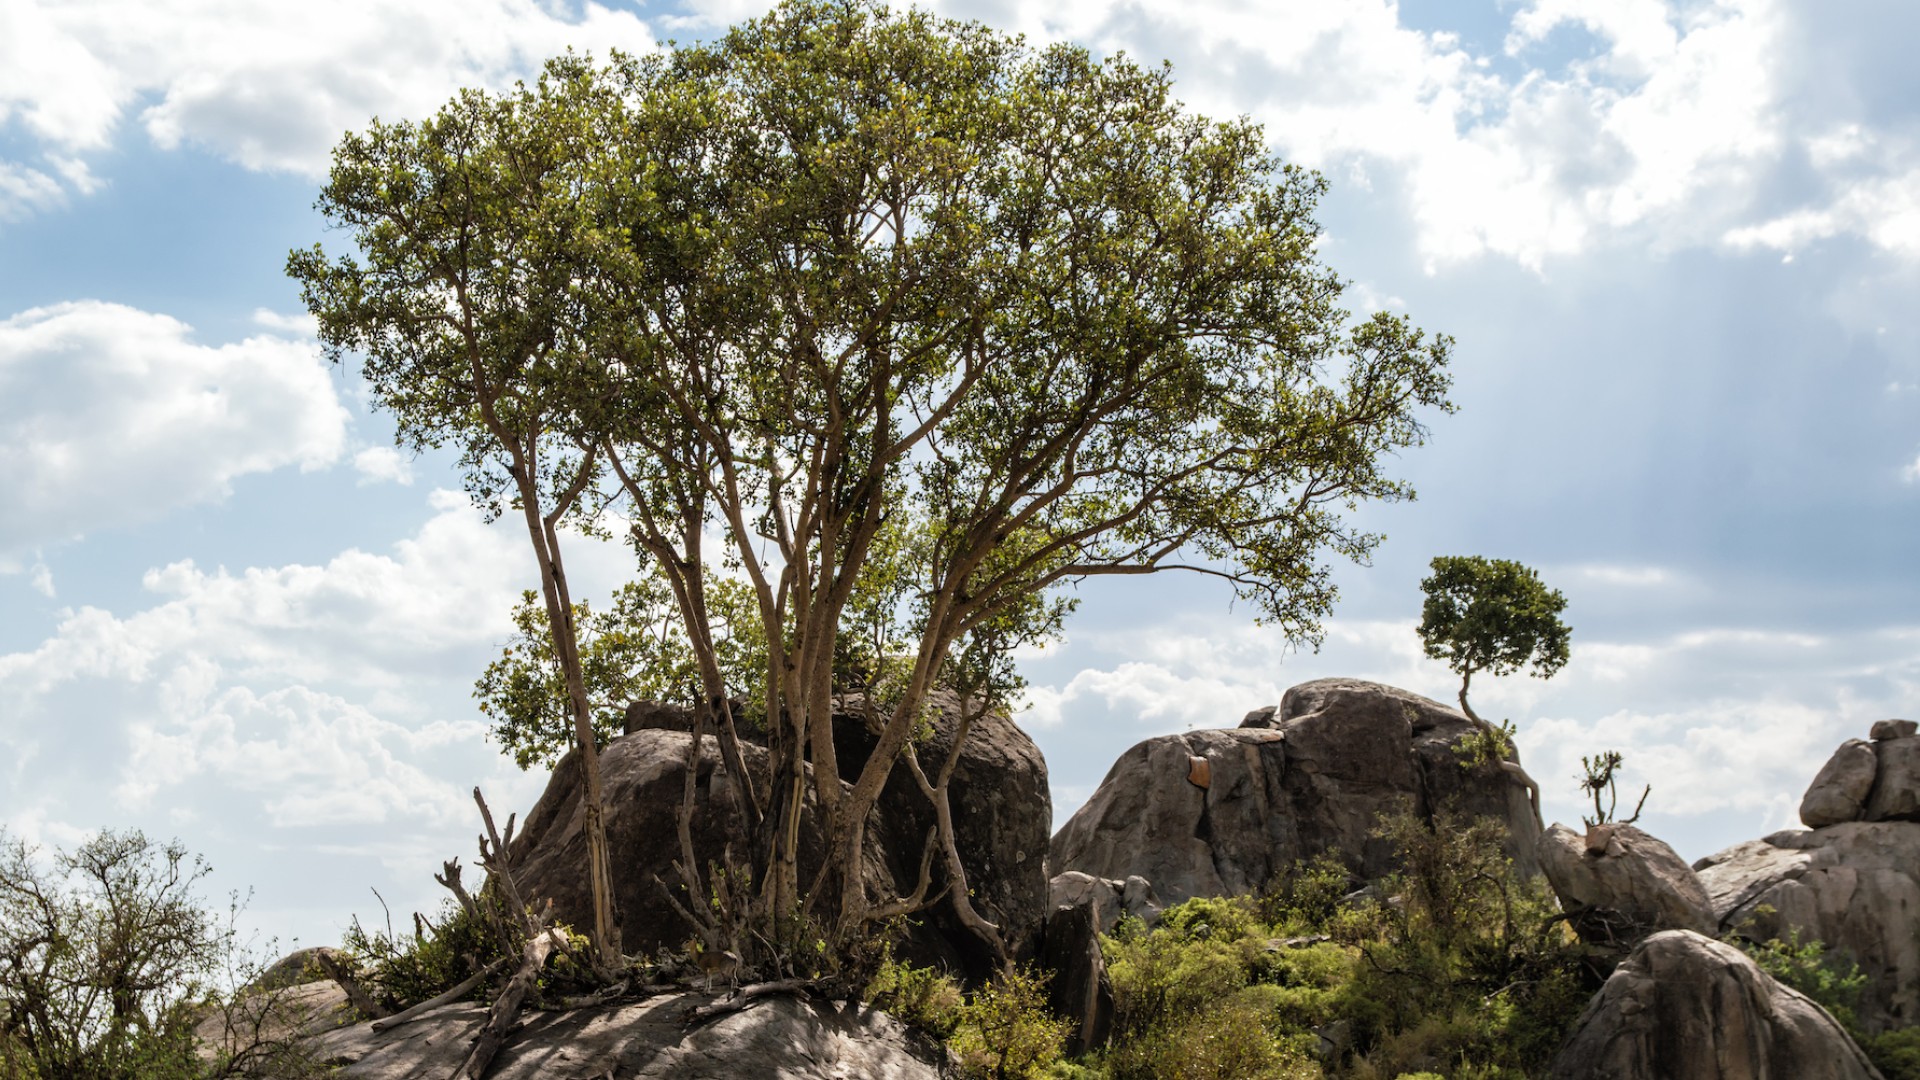 Serengeti rock formations called Kopjes in Tanzania surrounded by trees